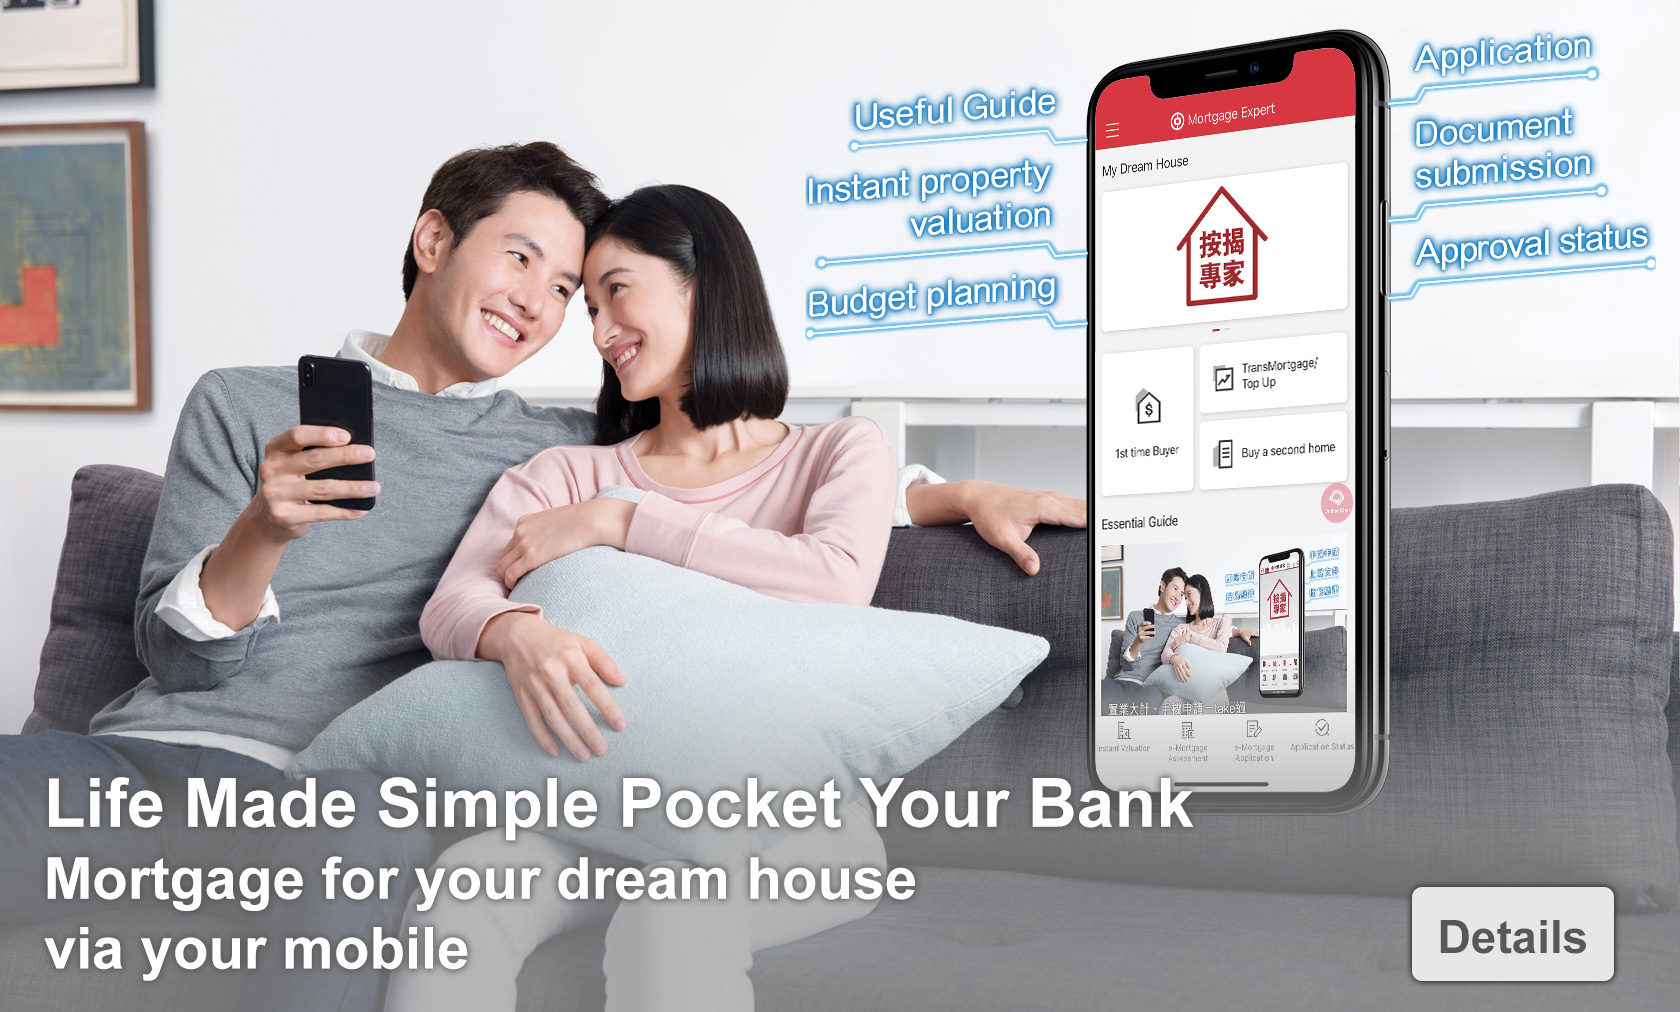 Life Made Simple Pocket Your Bank
        Mortgage for your dream house via your mobile